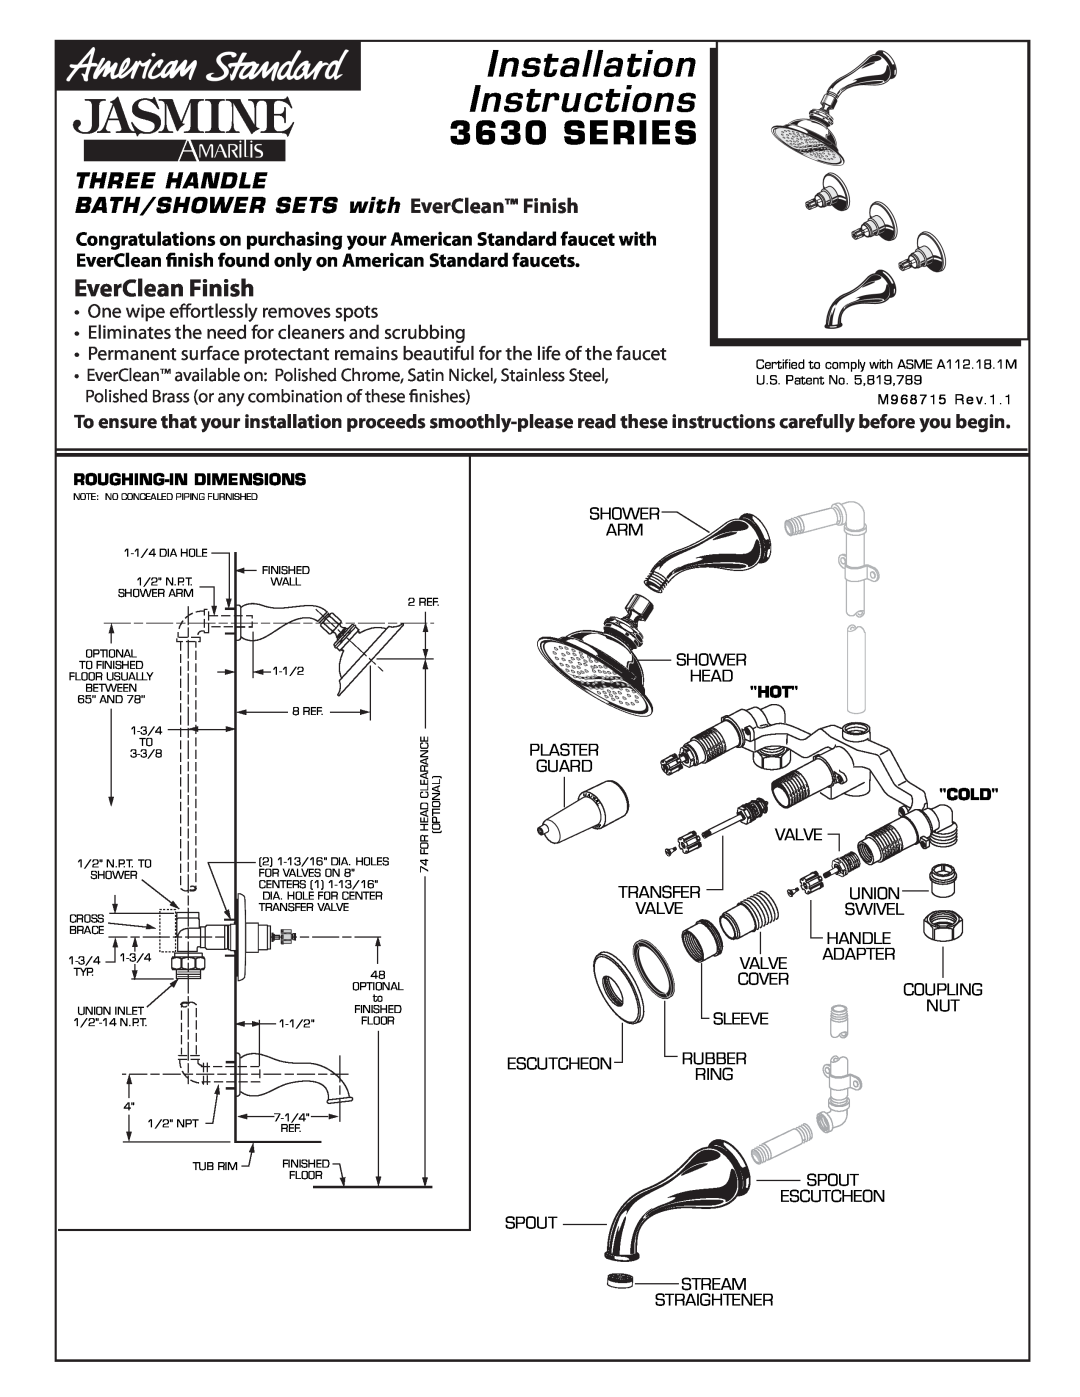 American Standard 3630 SERIES installation instructions Roughing-In Dimensions, Cold, Installation Instructions, Series 